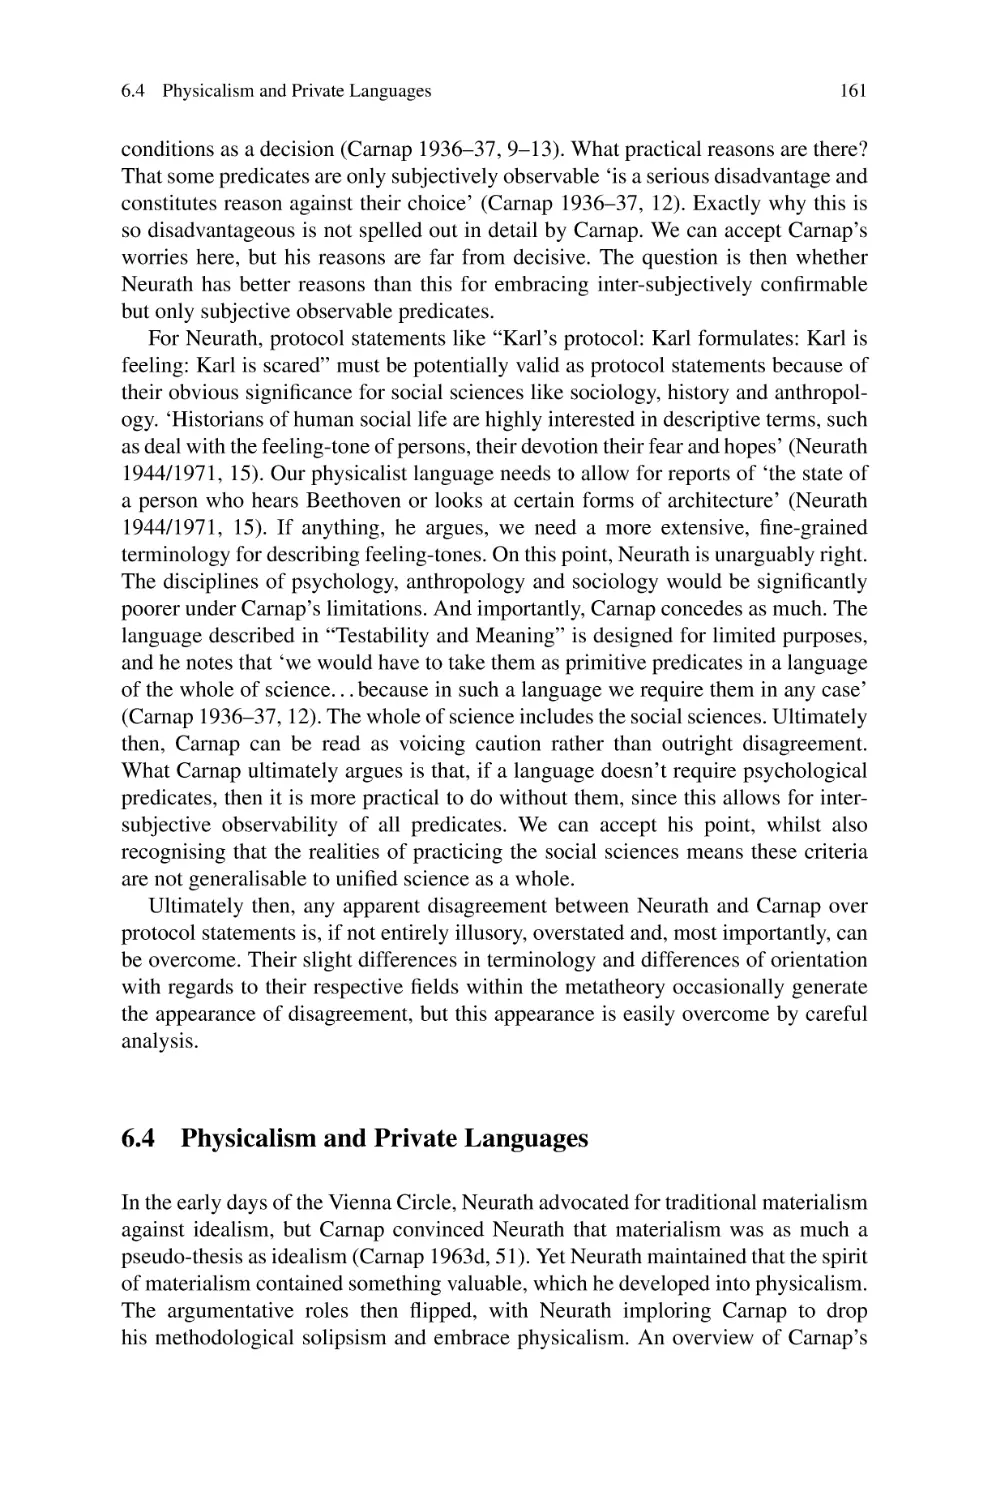 6.4 Physicalism and Private Languages